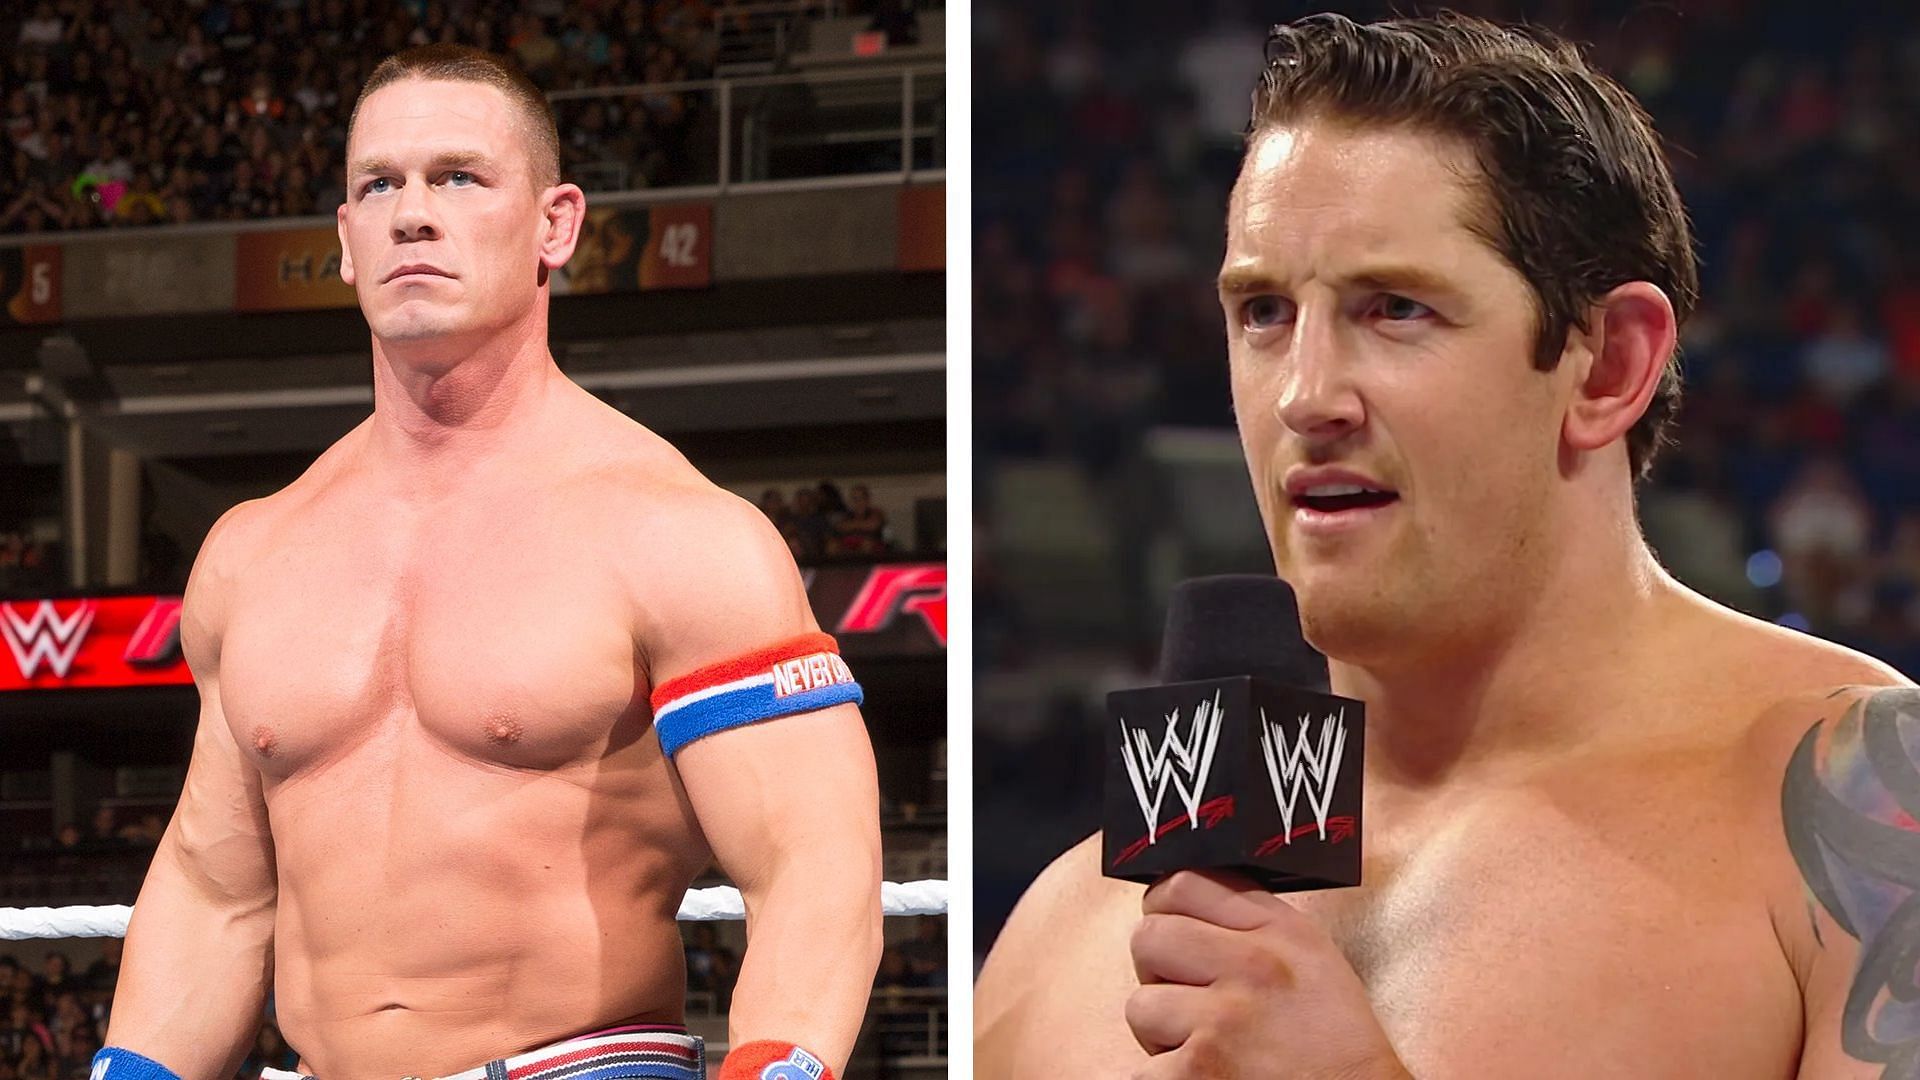 WWE Superstars and legends have joined opposing factions including John Cena